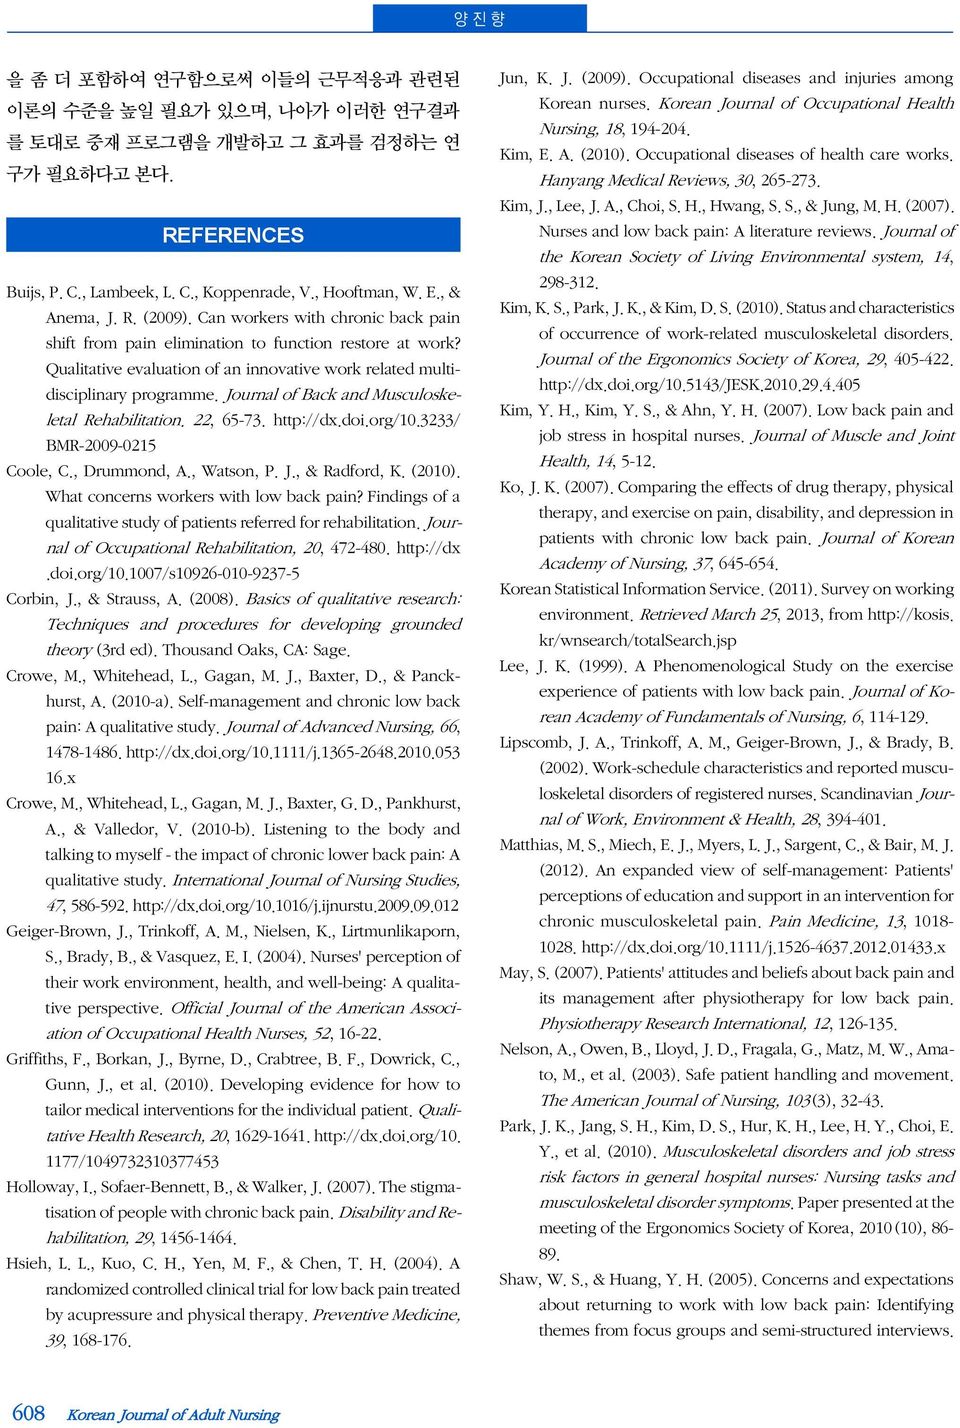 Journal of Back and Musculoskeletal Rehabilitation. 22, 65-73. http://dx.doi.org/10.3233/ BMR-2009-0215 Coole, C., Drummond, A., Watson, P. J., & Radford, K. (2010).